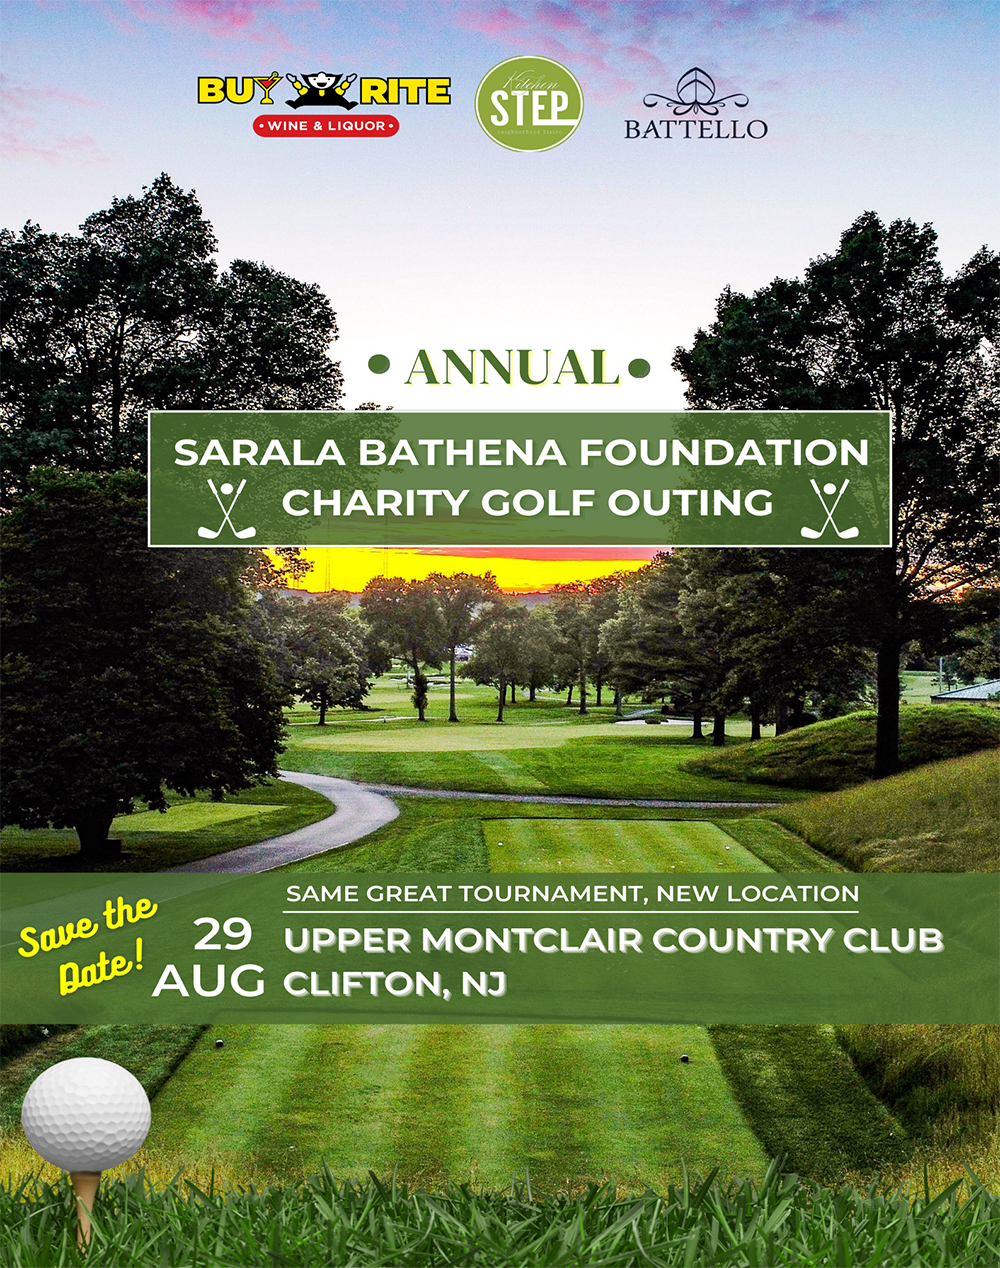 2022 Annual Charity Golf Outing in Support of The Sarala Bathena Foundation